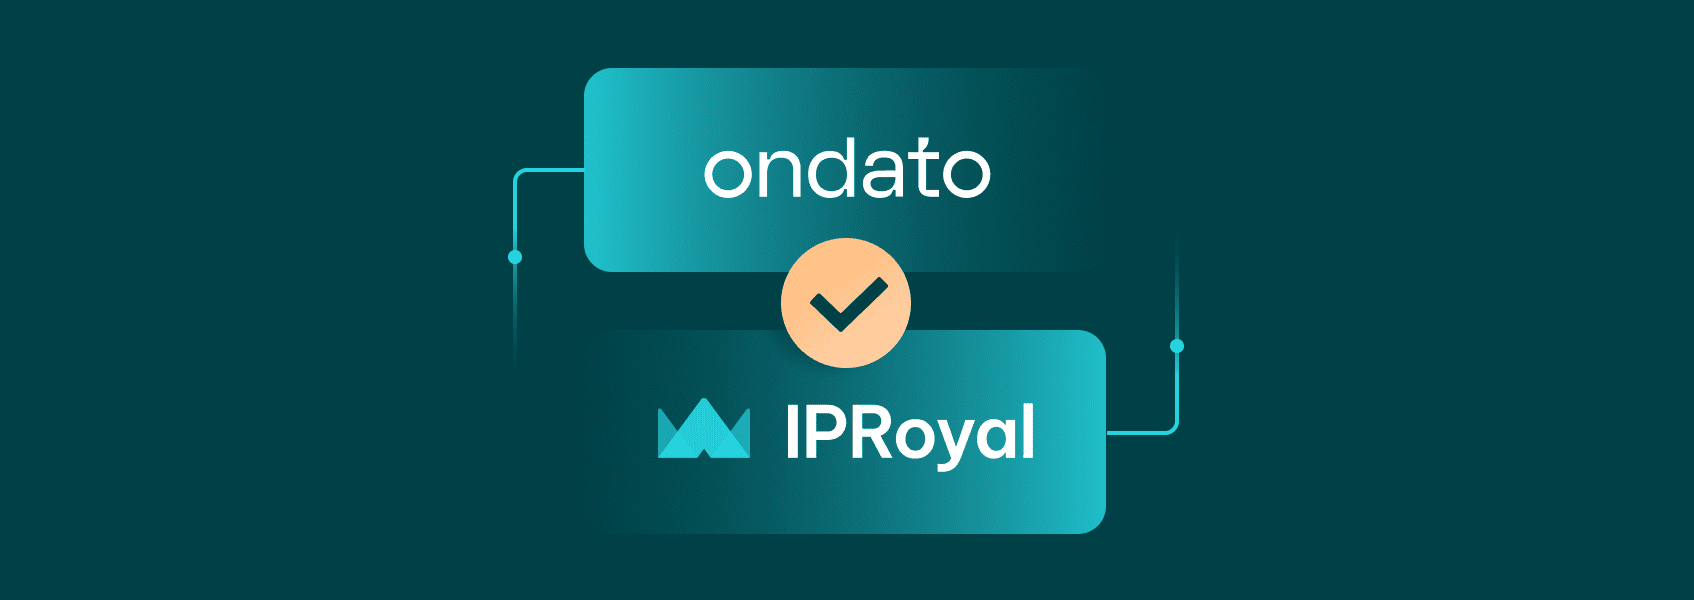 How IPRoyal Helps Ondato Enhance Marketing and Expand Its Client Base